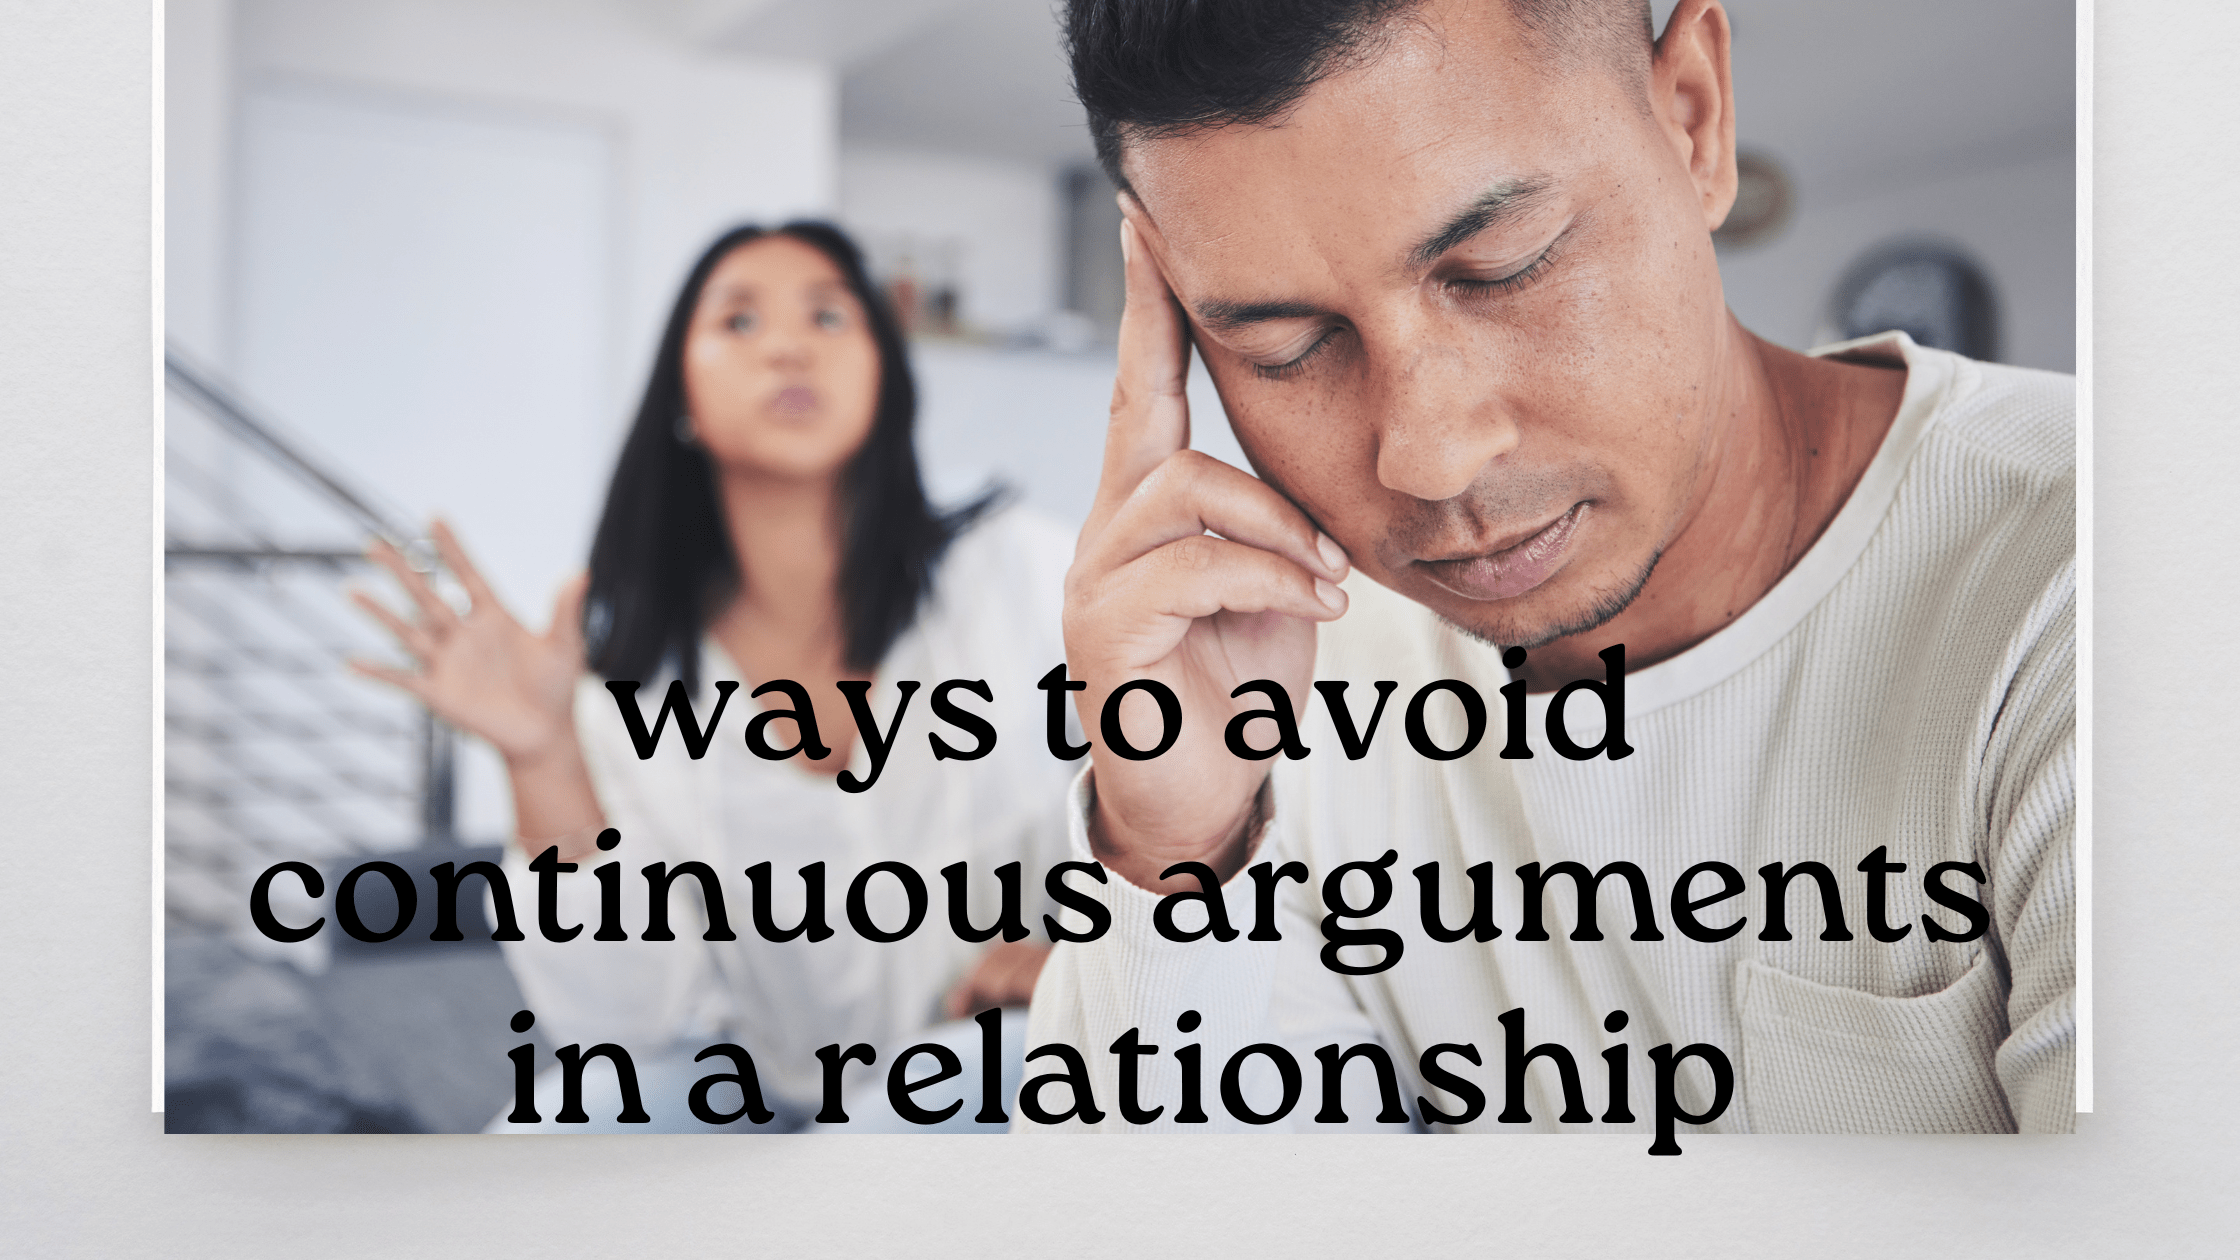 10 easy ways to avoid continuous arguments in a relationship 5